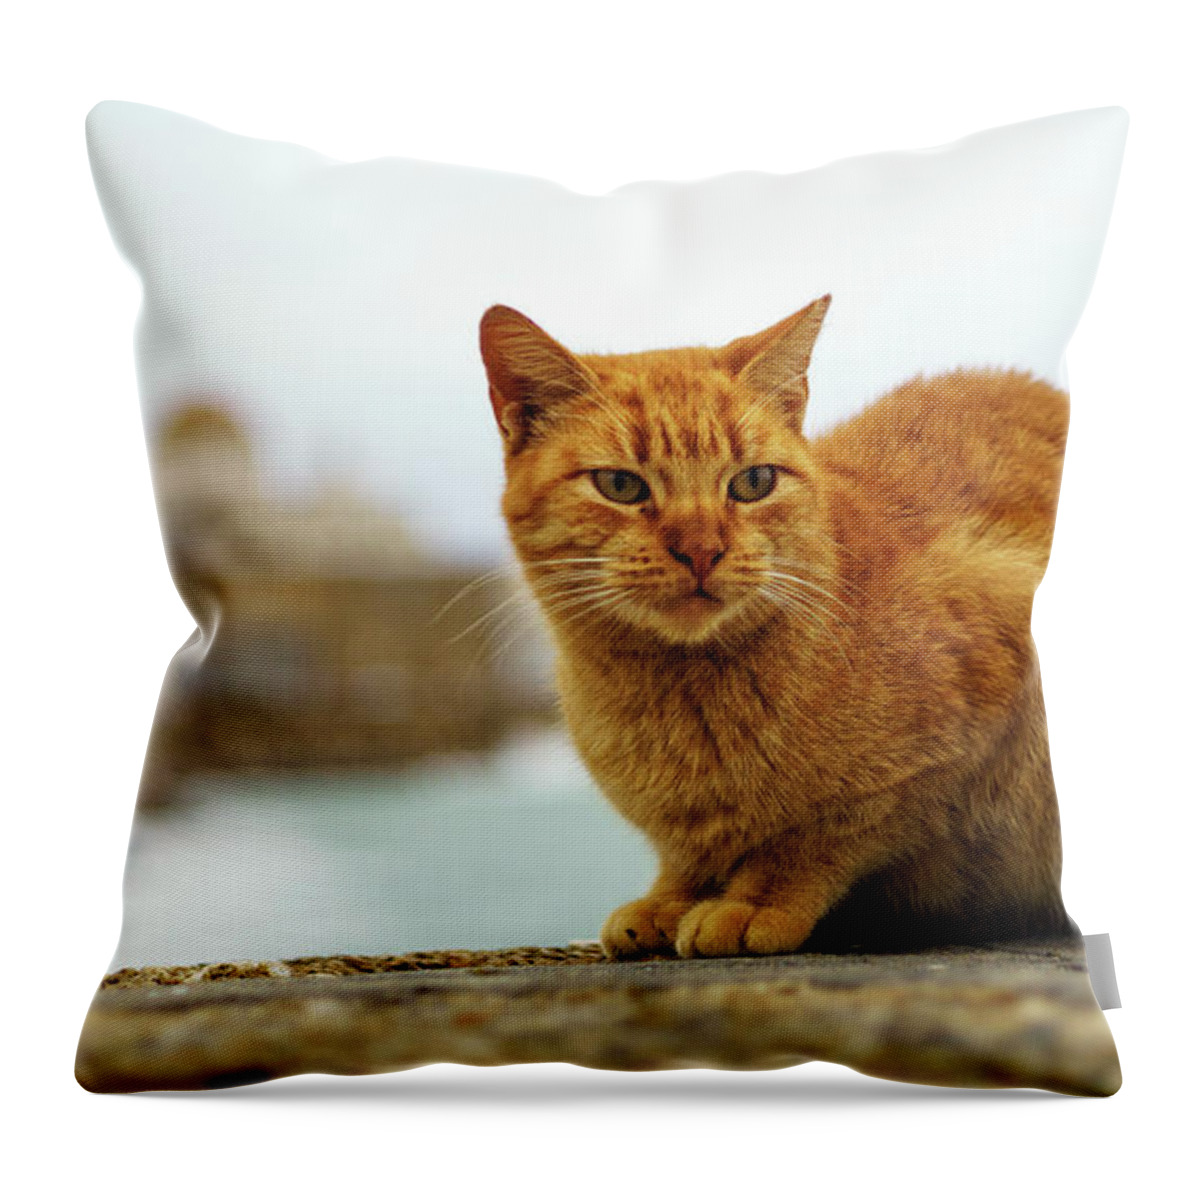 Single Throw Pillow featuring the photograph Orange Cat by the Sea #2 by Pablo Avanzini